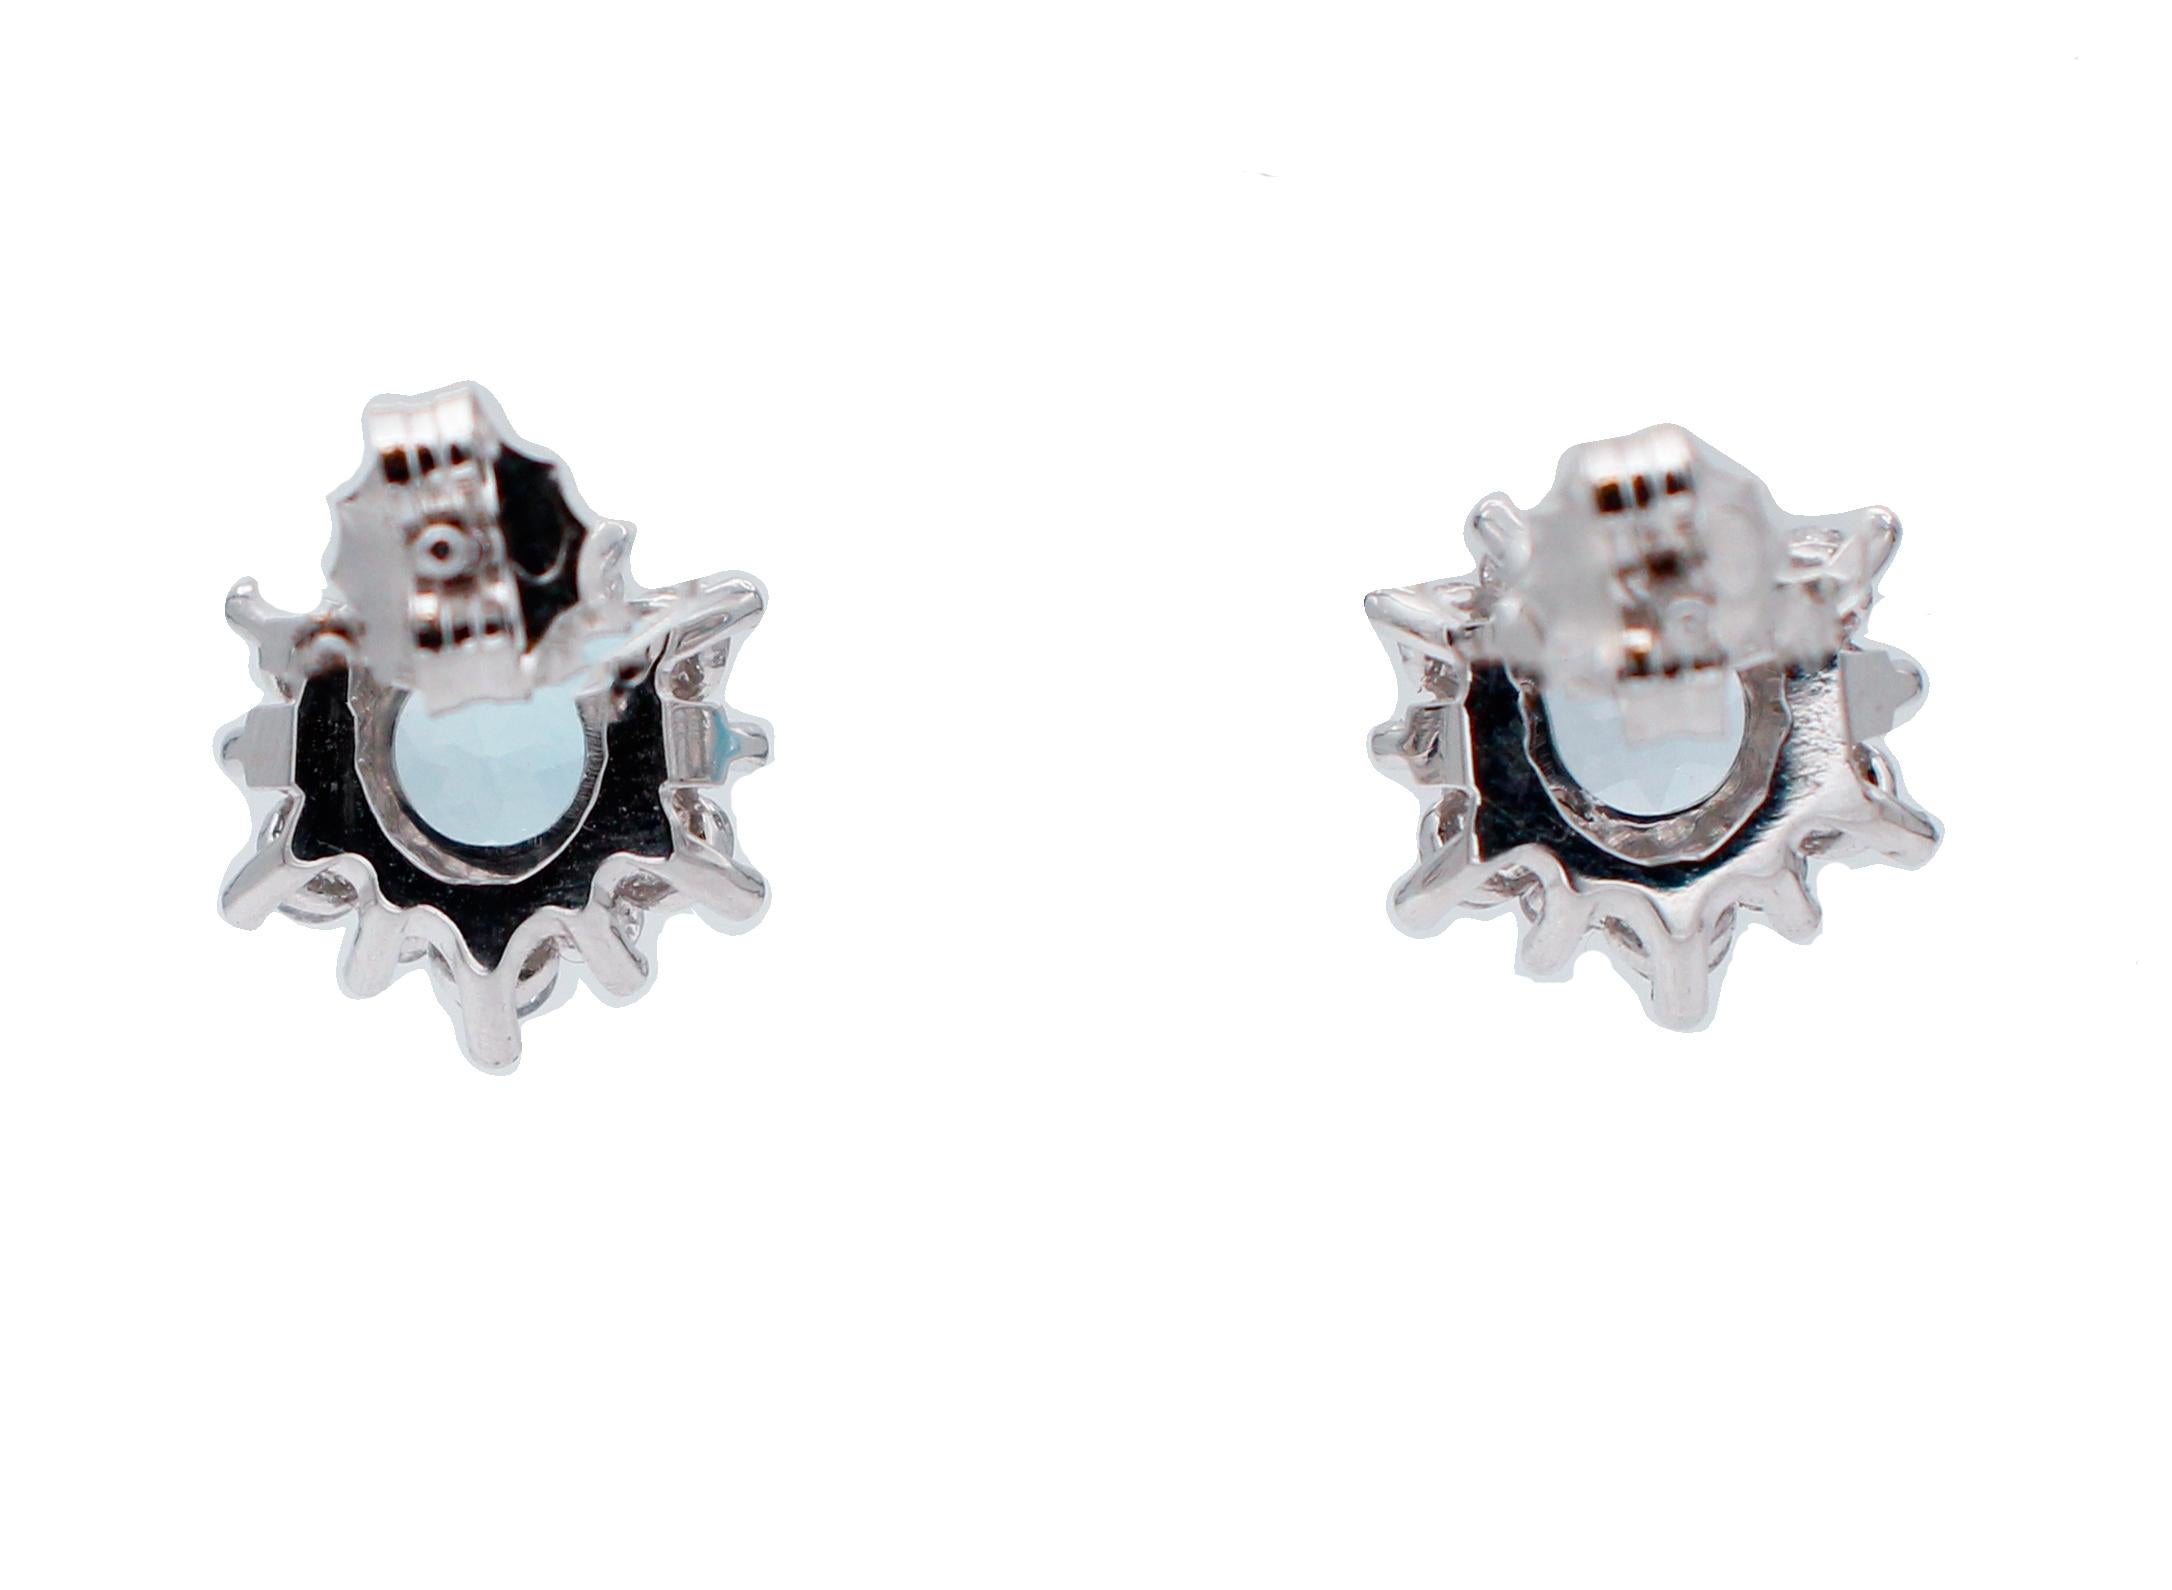 Beautiful earrings realized in 18 karat white gold structure studded with a round aquamarine surrounded by white diamonds.
These earrings are totally handmade by Italian master goldsmiths and they are in perfect condition.
Diamonds 1.17